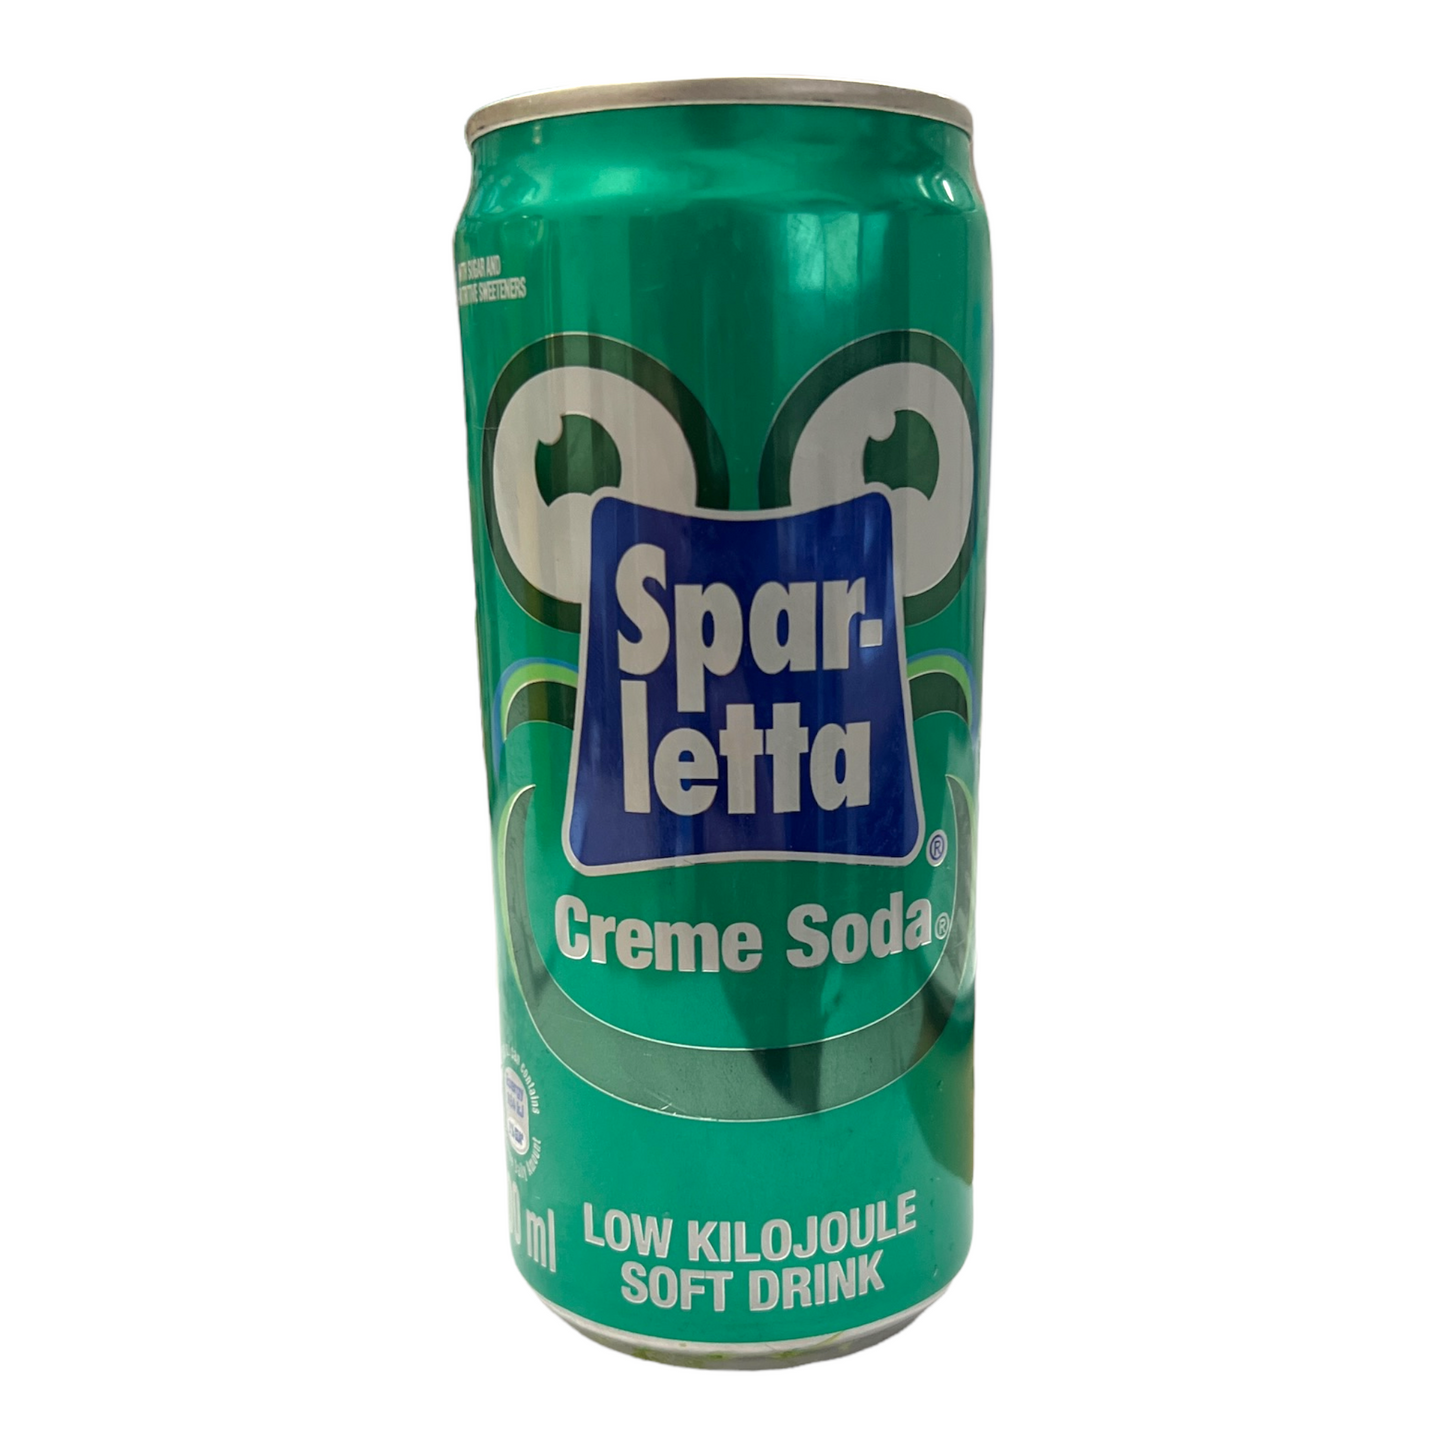 Spar-letta Creme Soda Soft Drink 300ml (Pack of 6)-South African